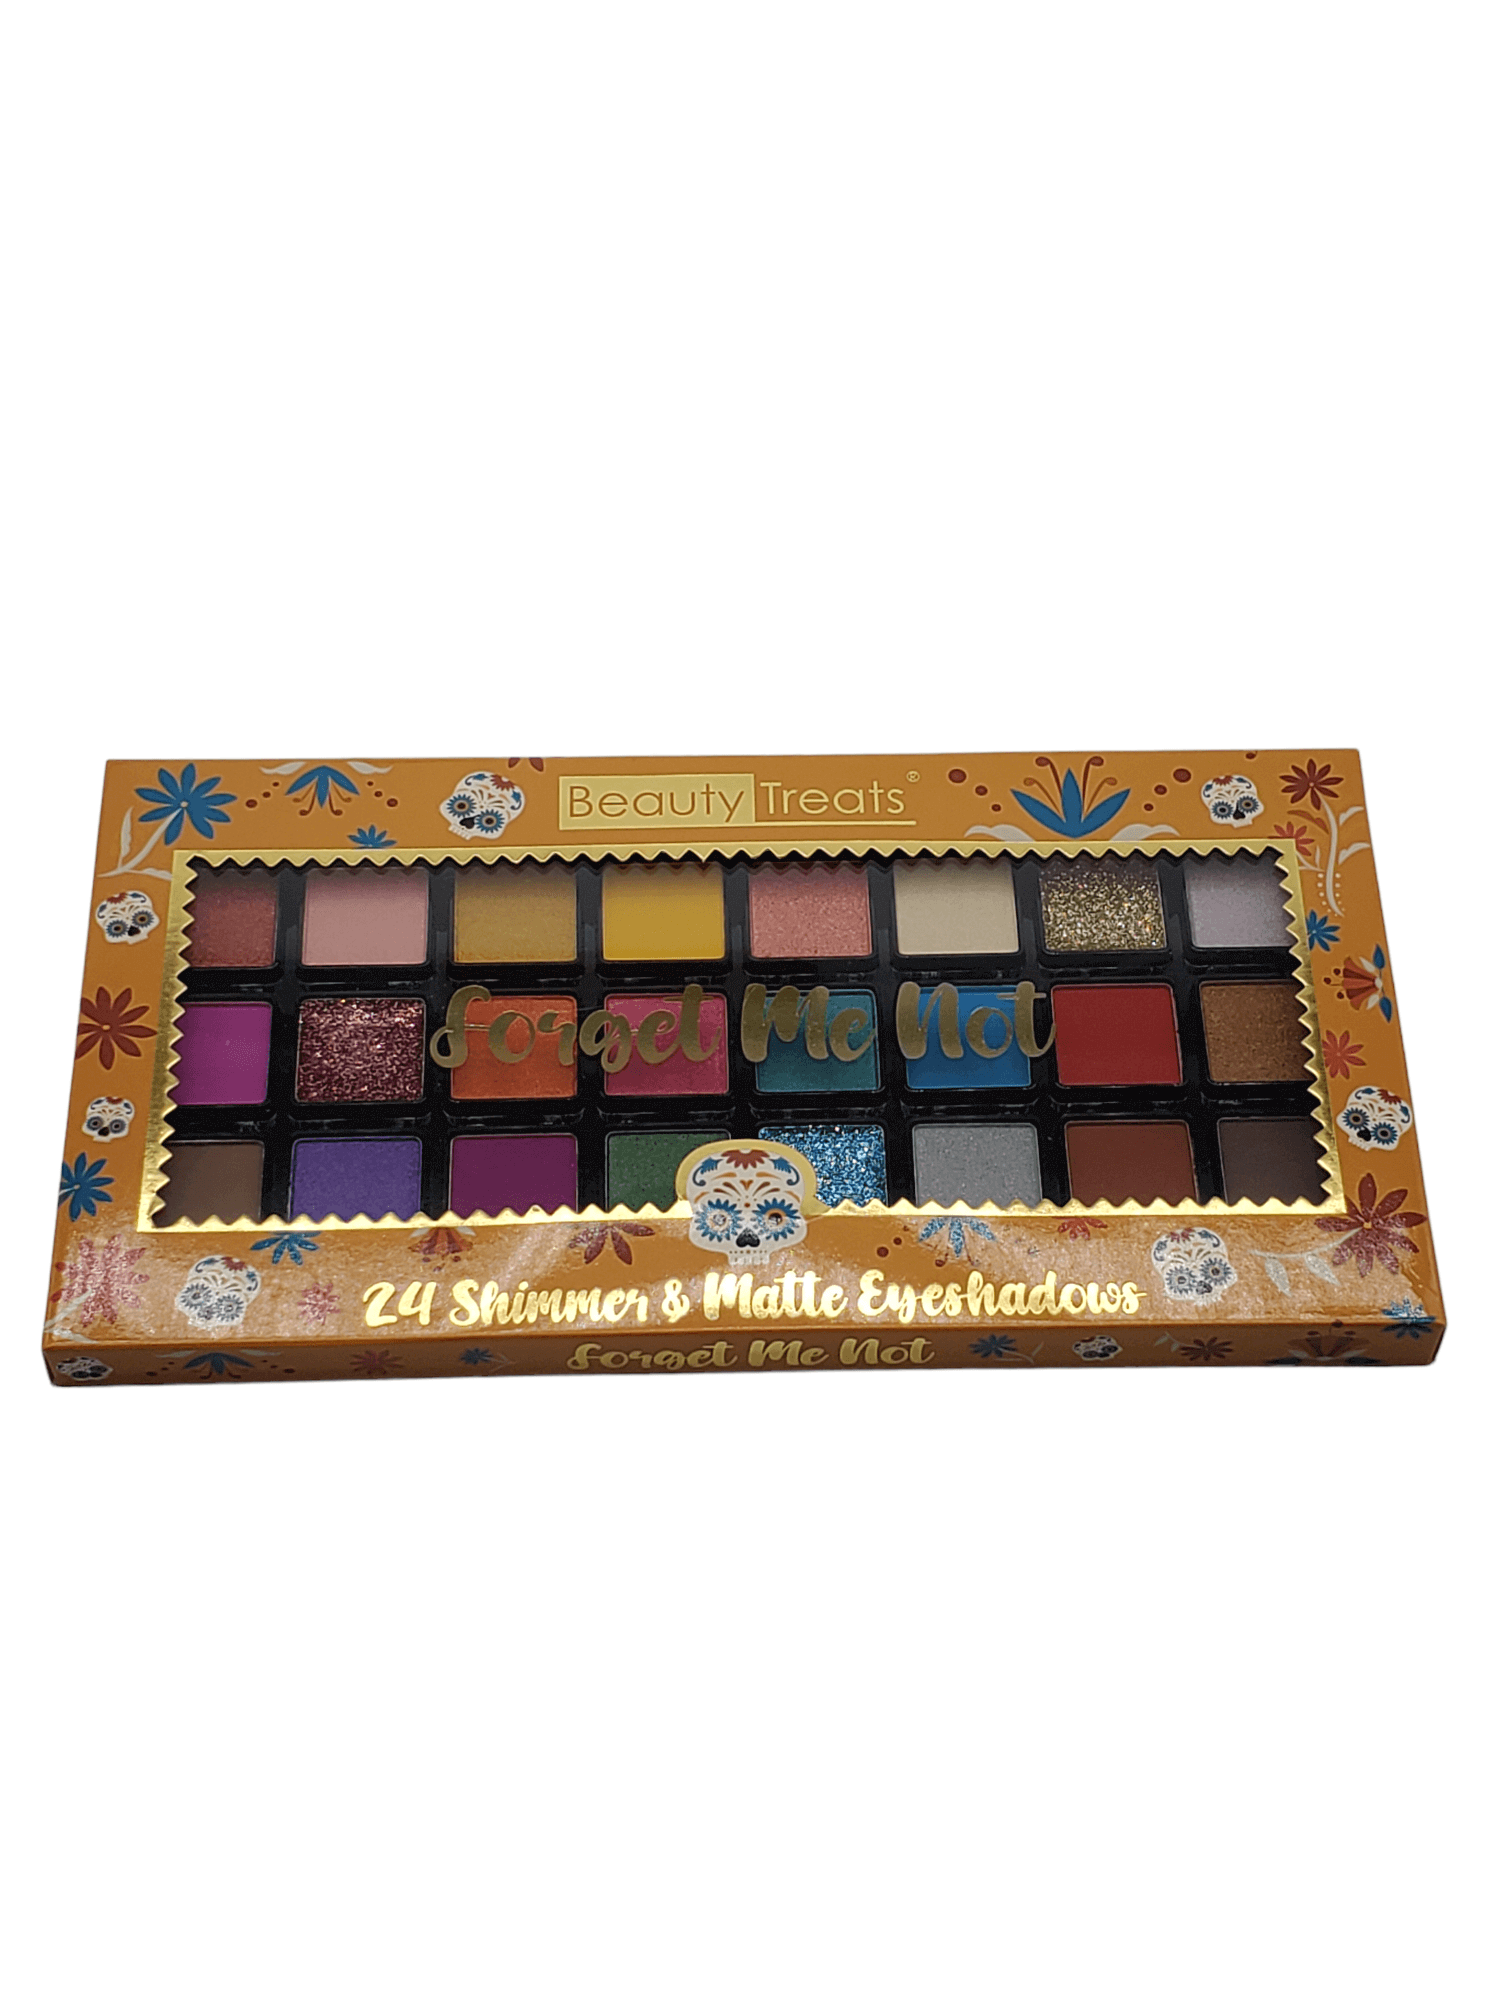 Beauty Treats 'Forget Me Not' 24 Shimmer & Matte Eyeshadows Palette #702-D14 (3PC)